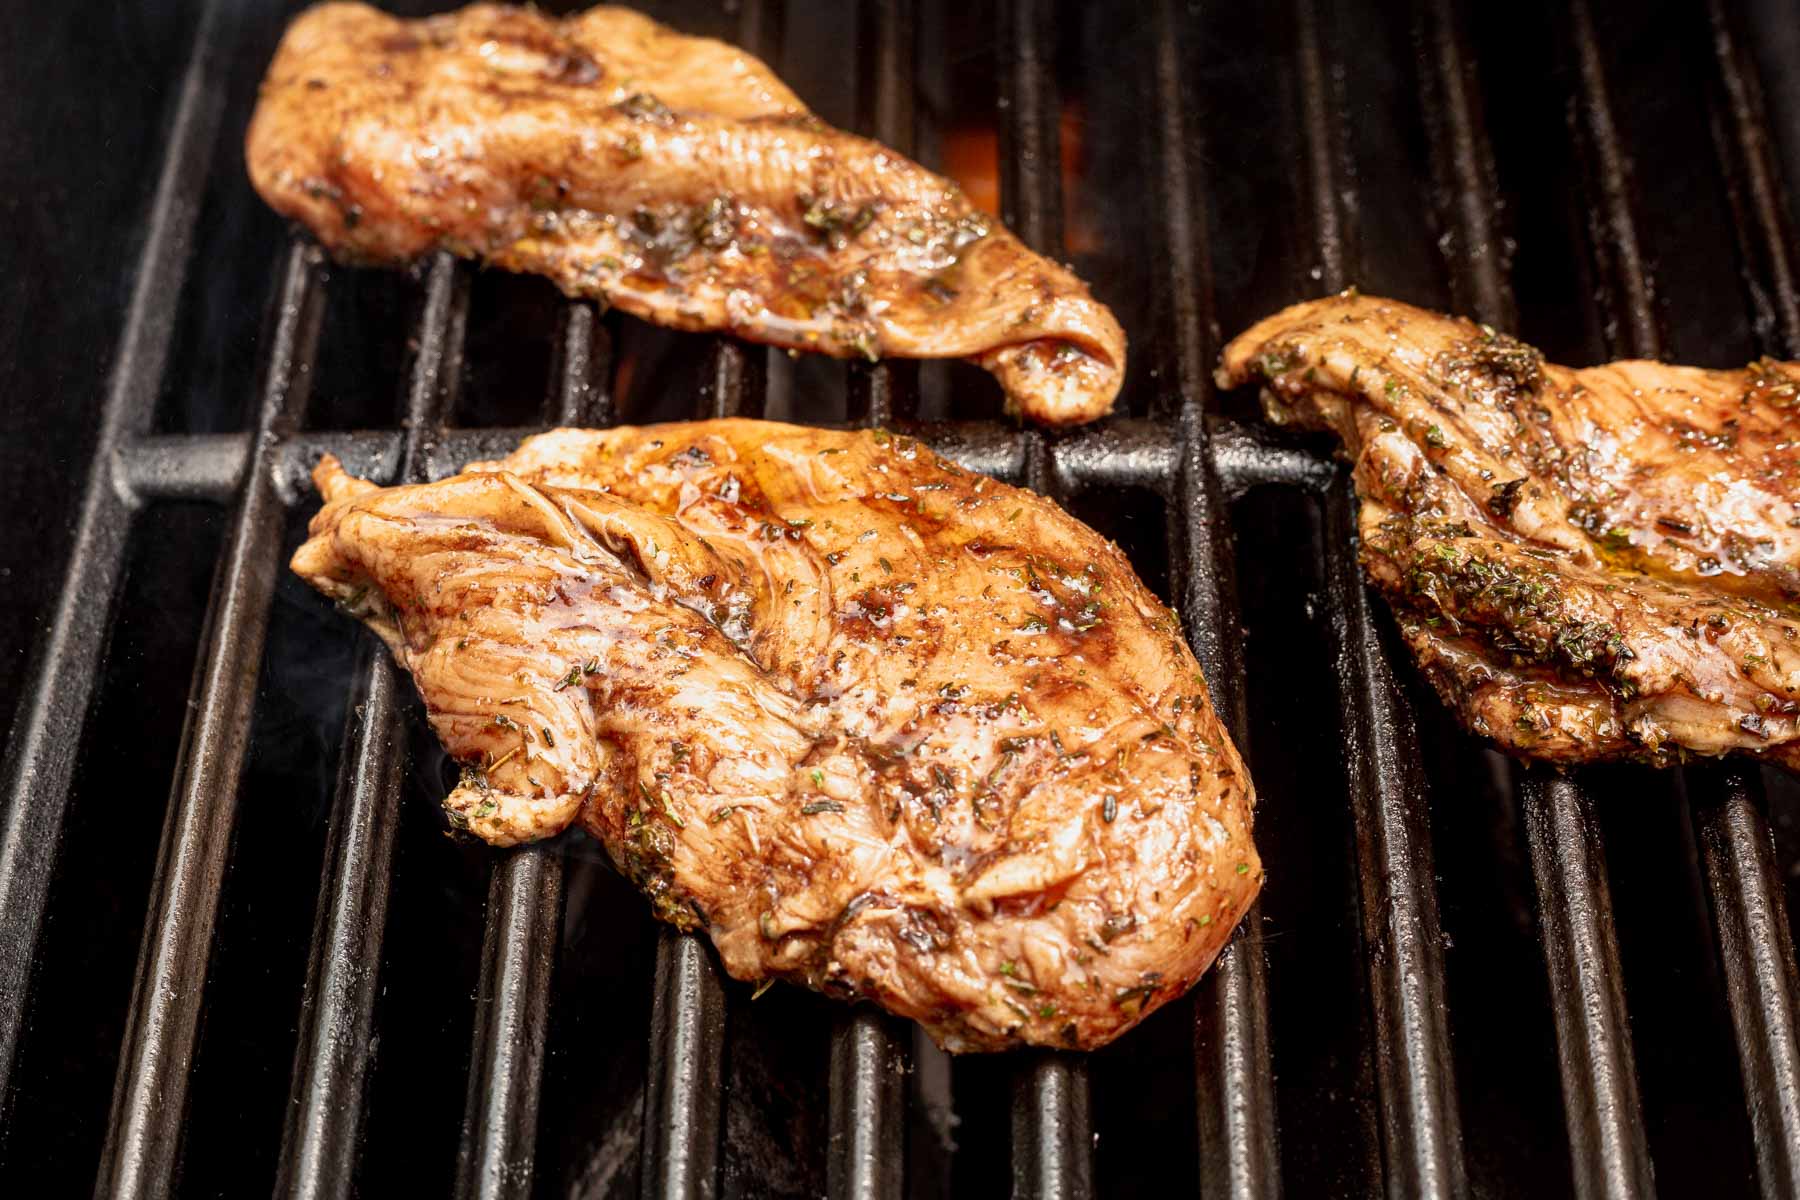 raw chicken on the grill grates